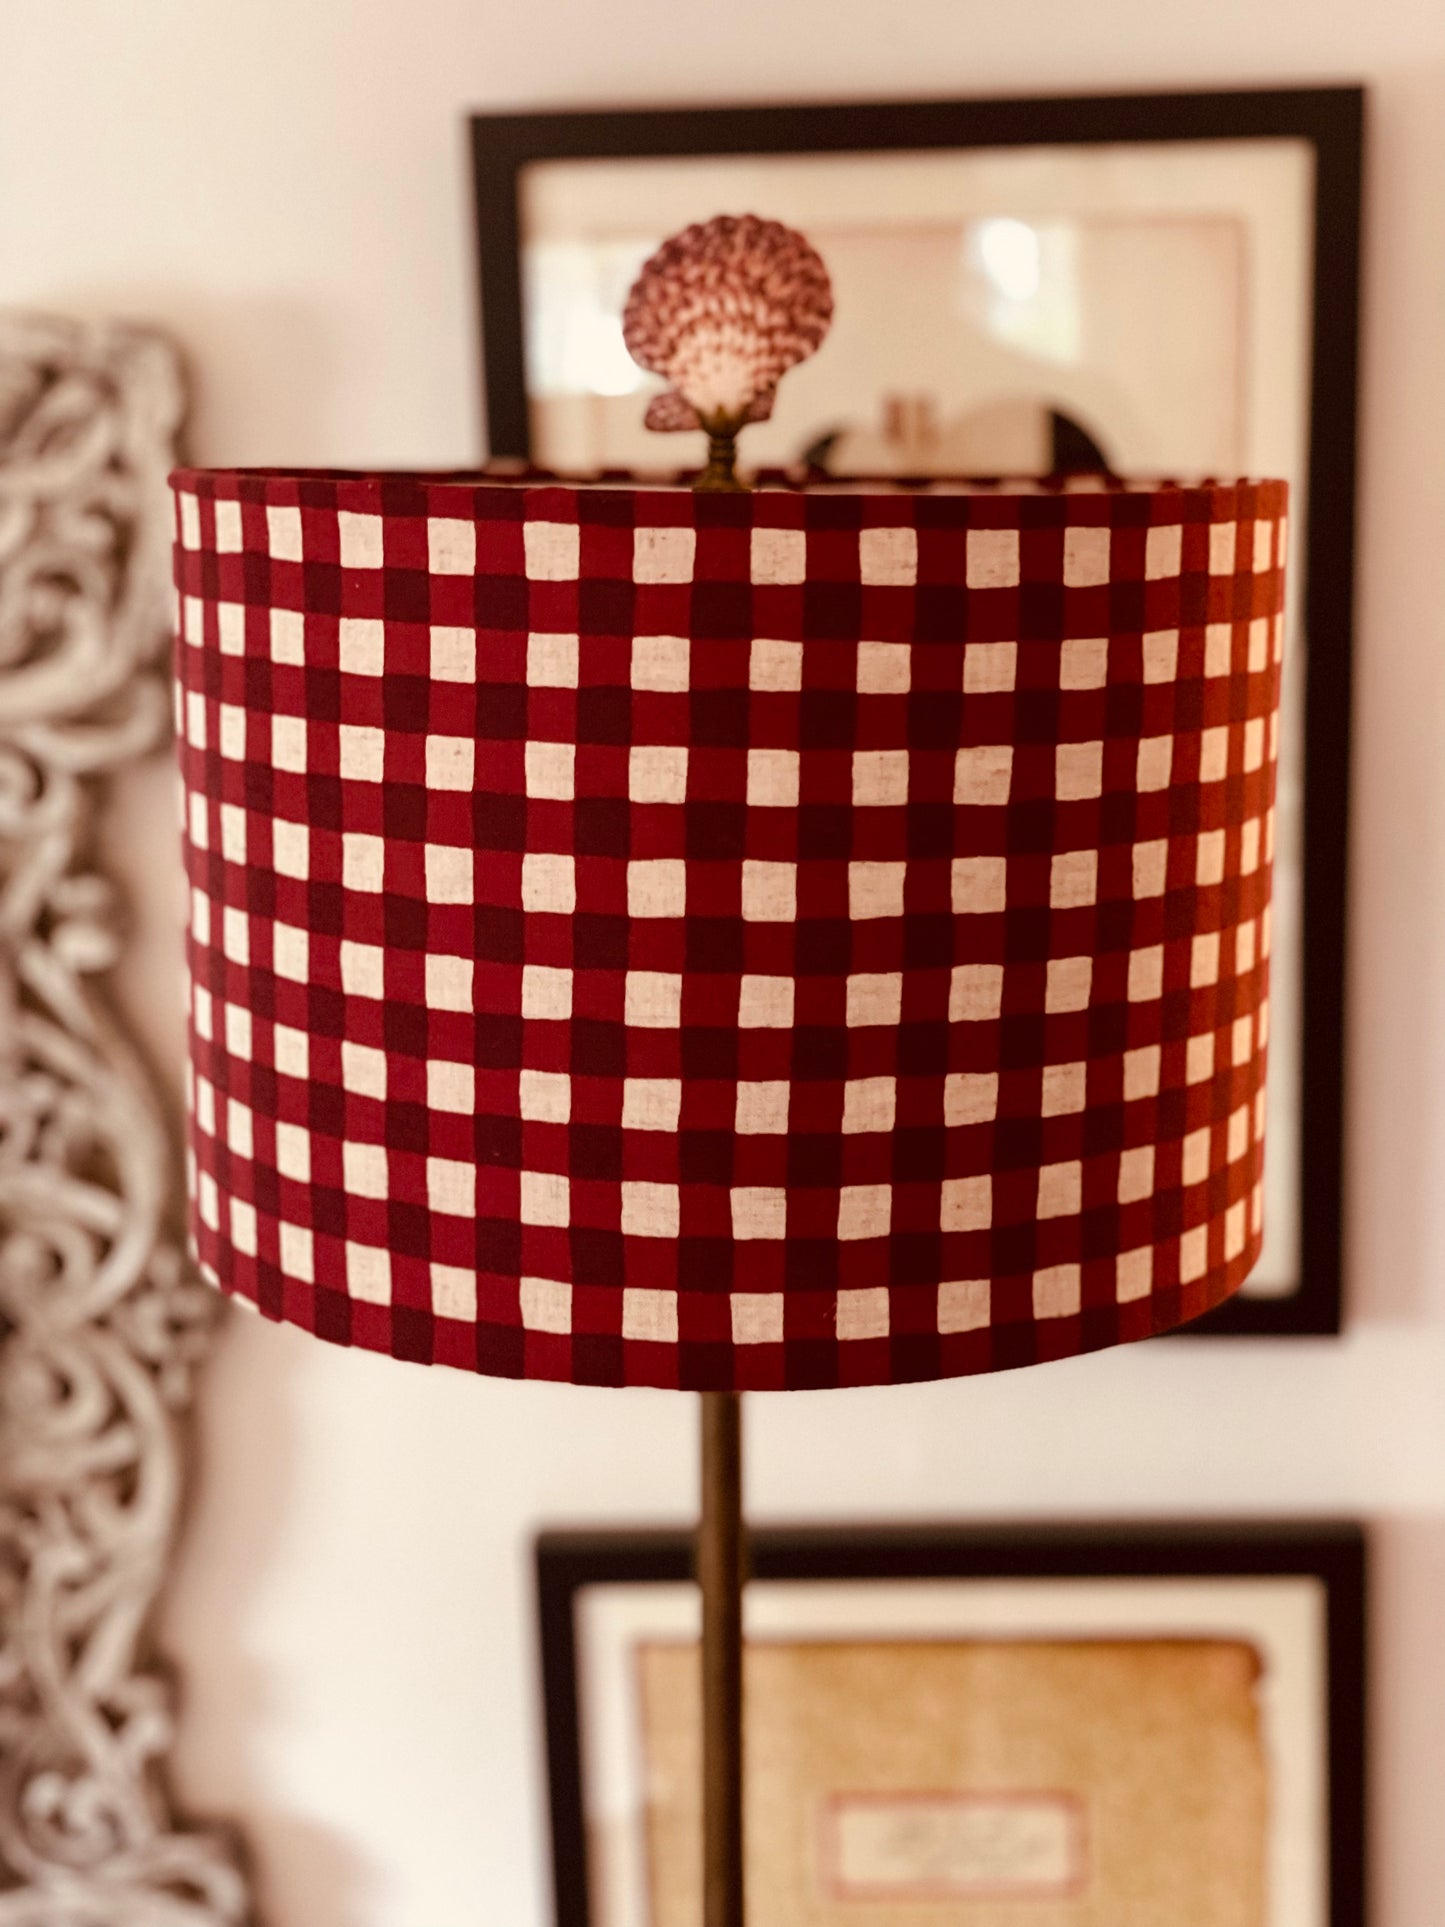 10 inch Drum Lampshade. Maroon-Red Gingham Cotton-Linen from Japan.